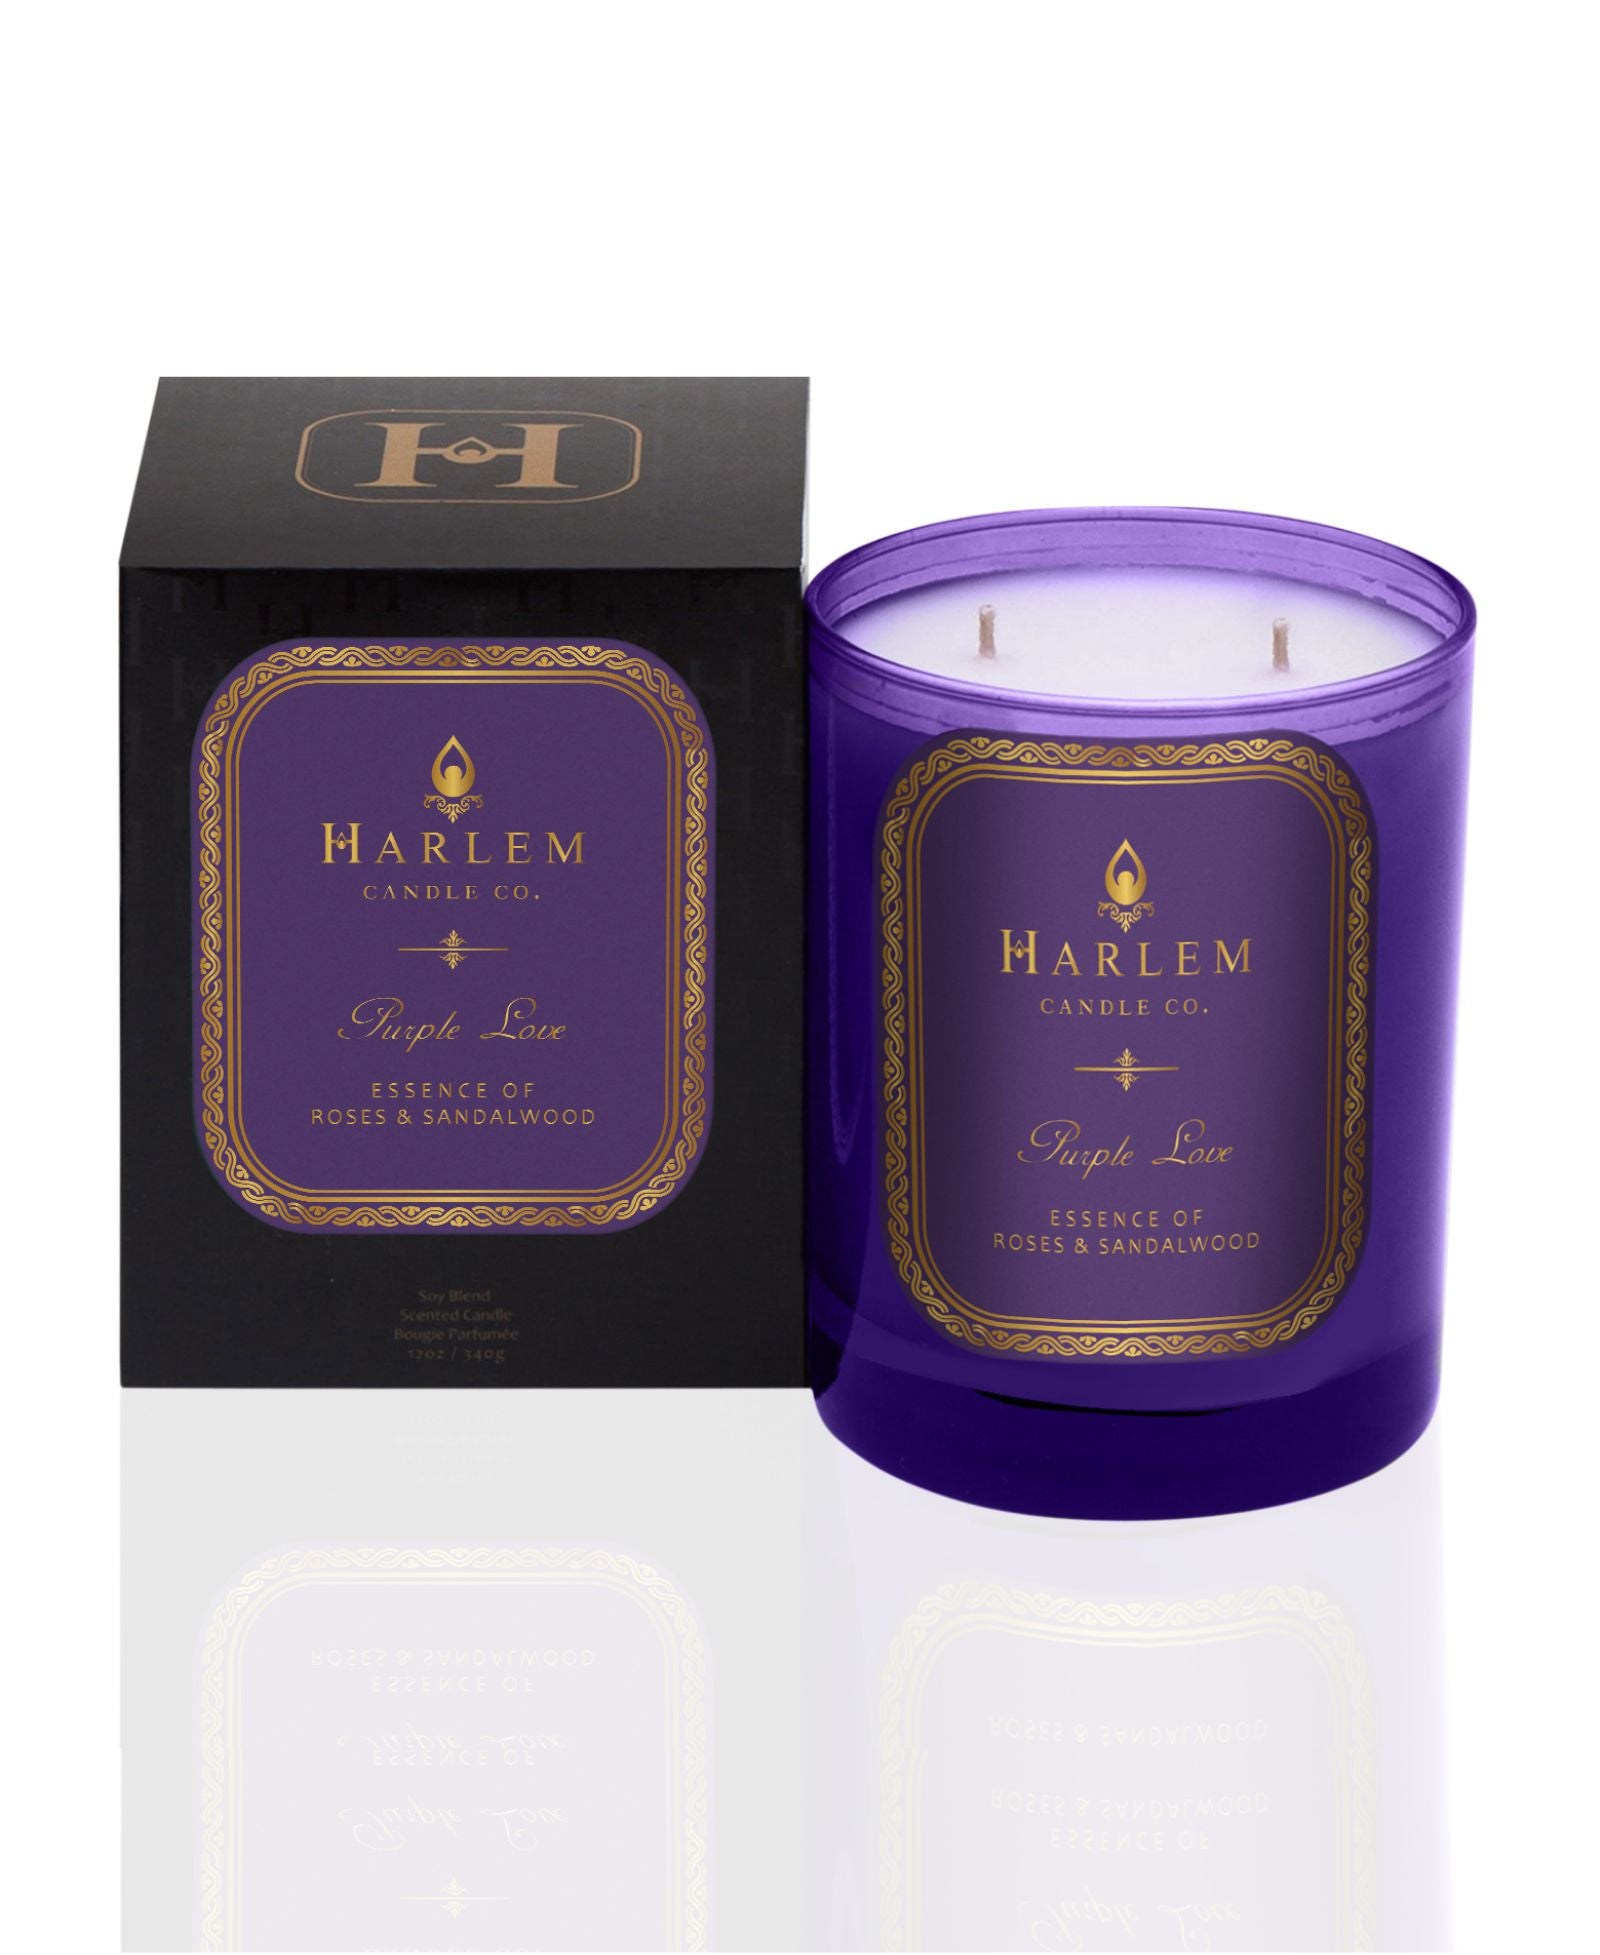 This is an image of our purple love candle next to its decorative box. This is also one of Oprah's favorite things for 2023.